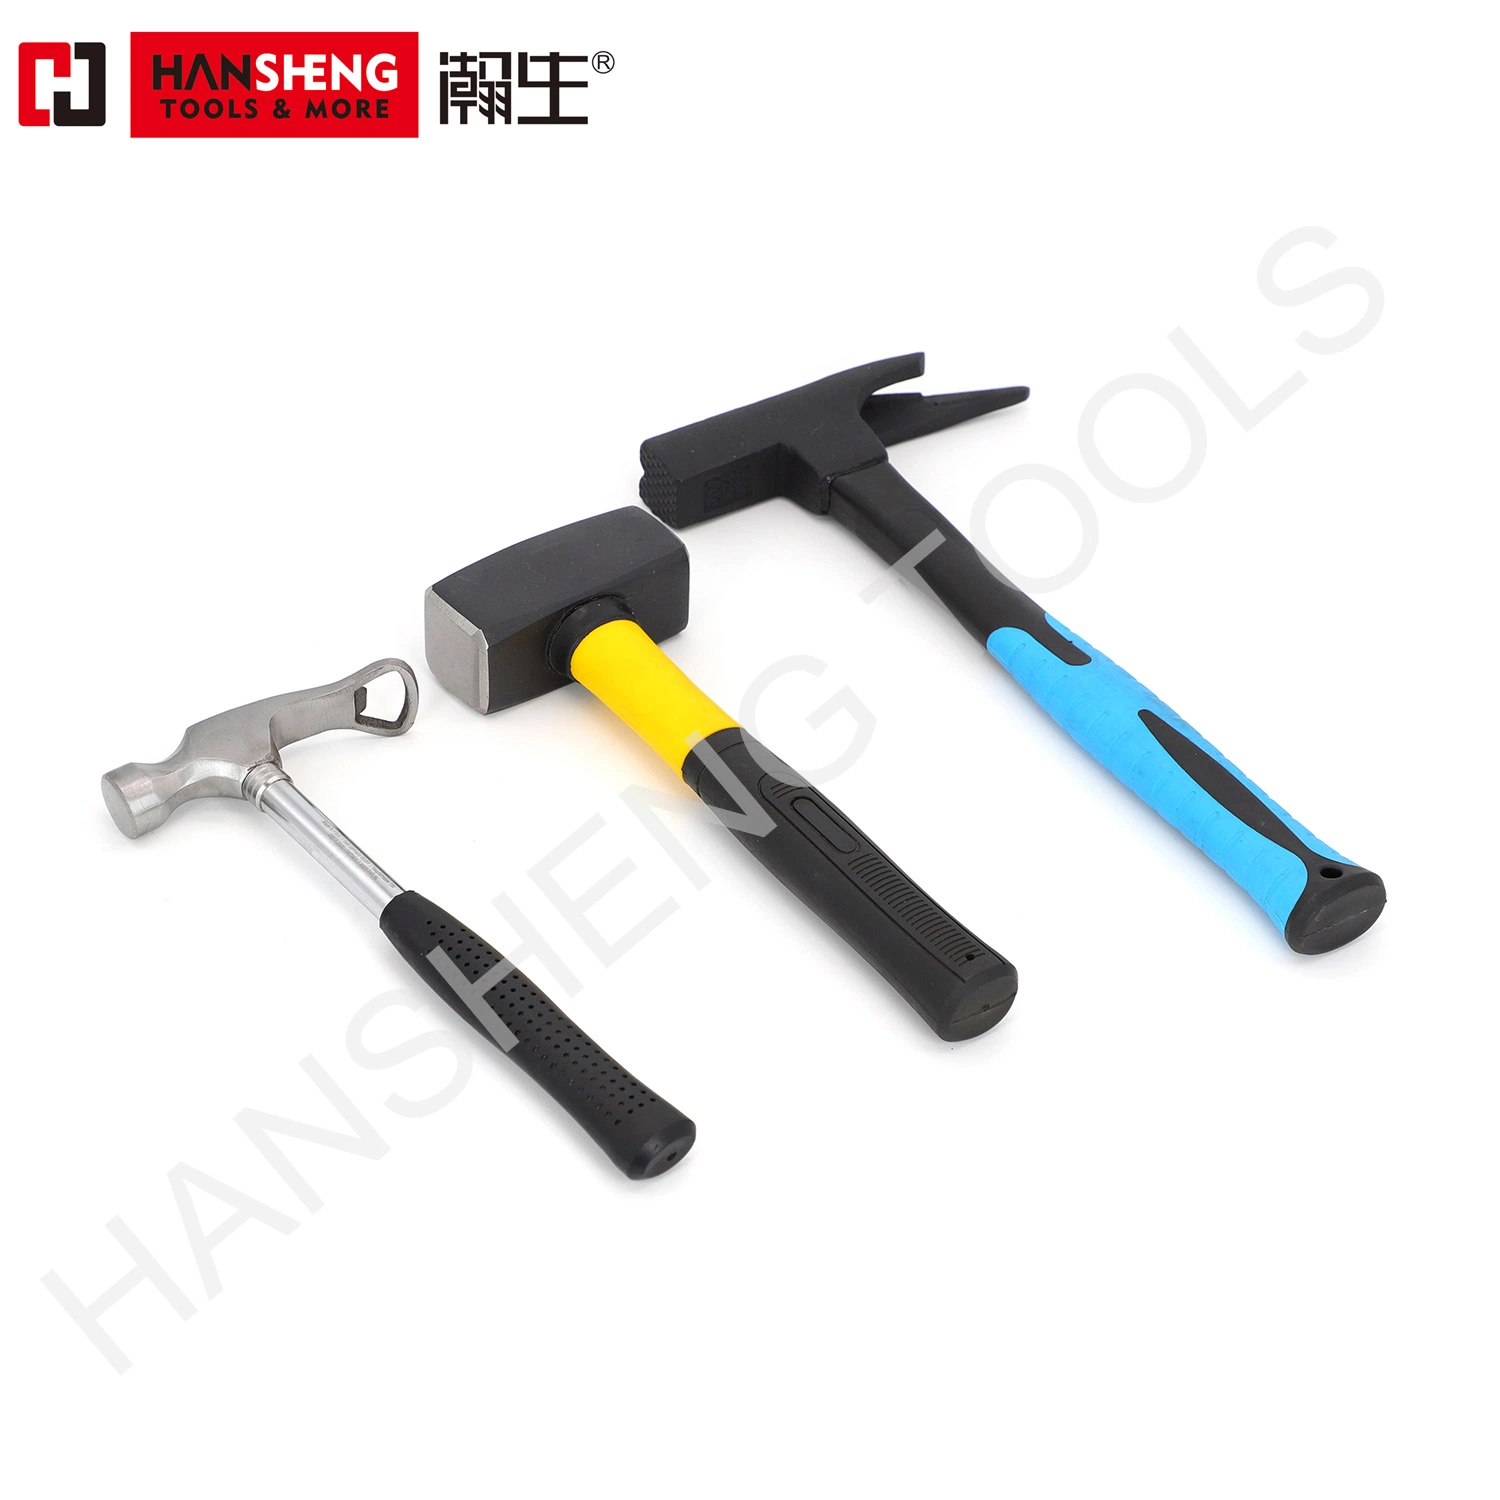 Professional Hammer, Hand Tools, Hardware Tools, Made of Carbon Steel, Full Head Polished, Mirror Polish, Wooden Handle, PVC Handle, Machinist Hammer